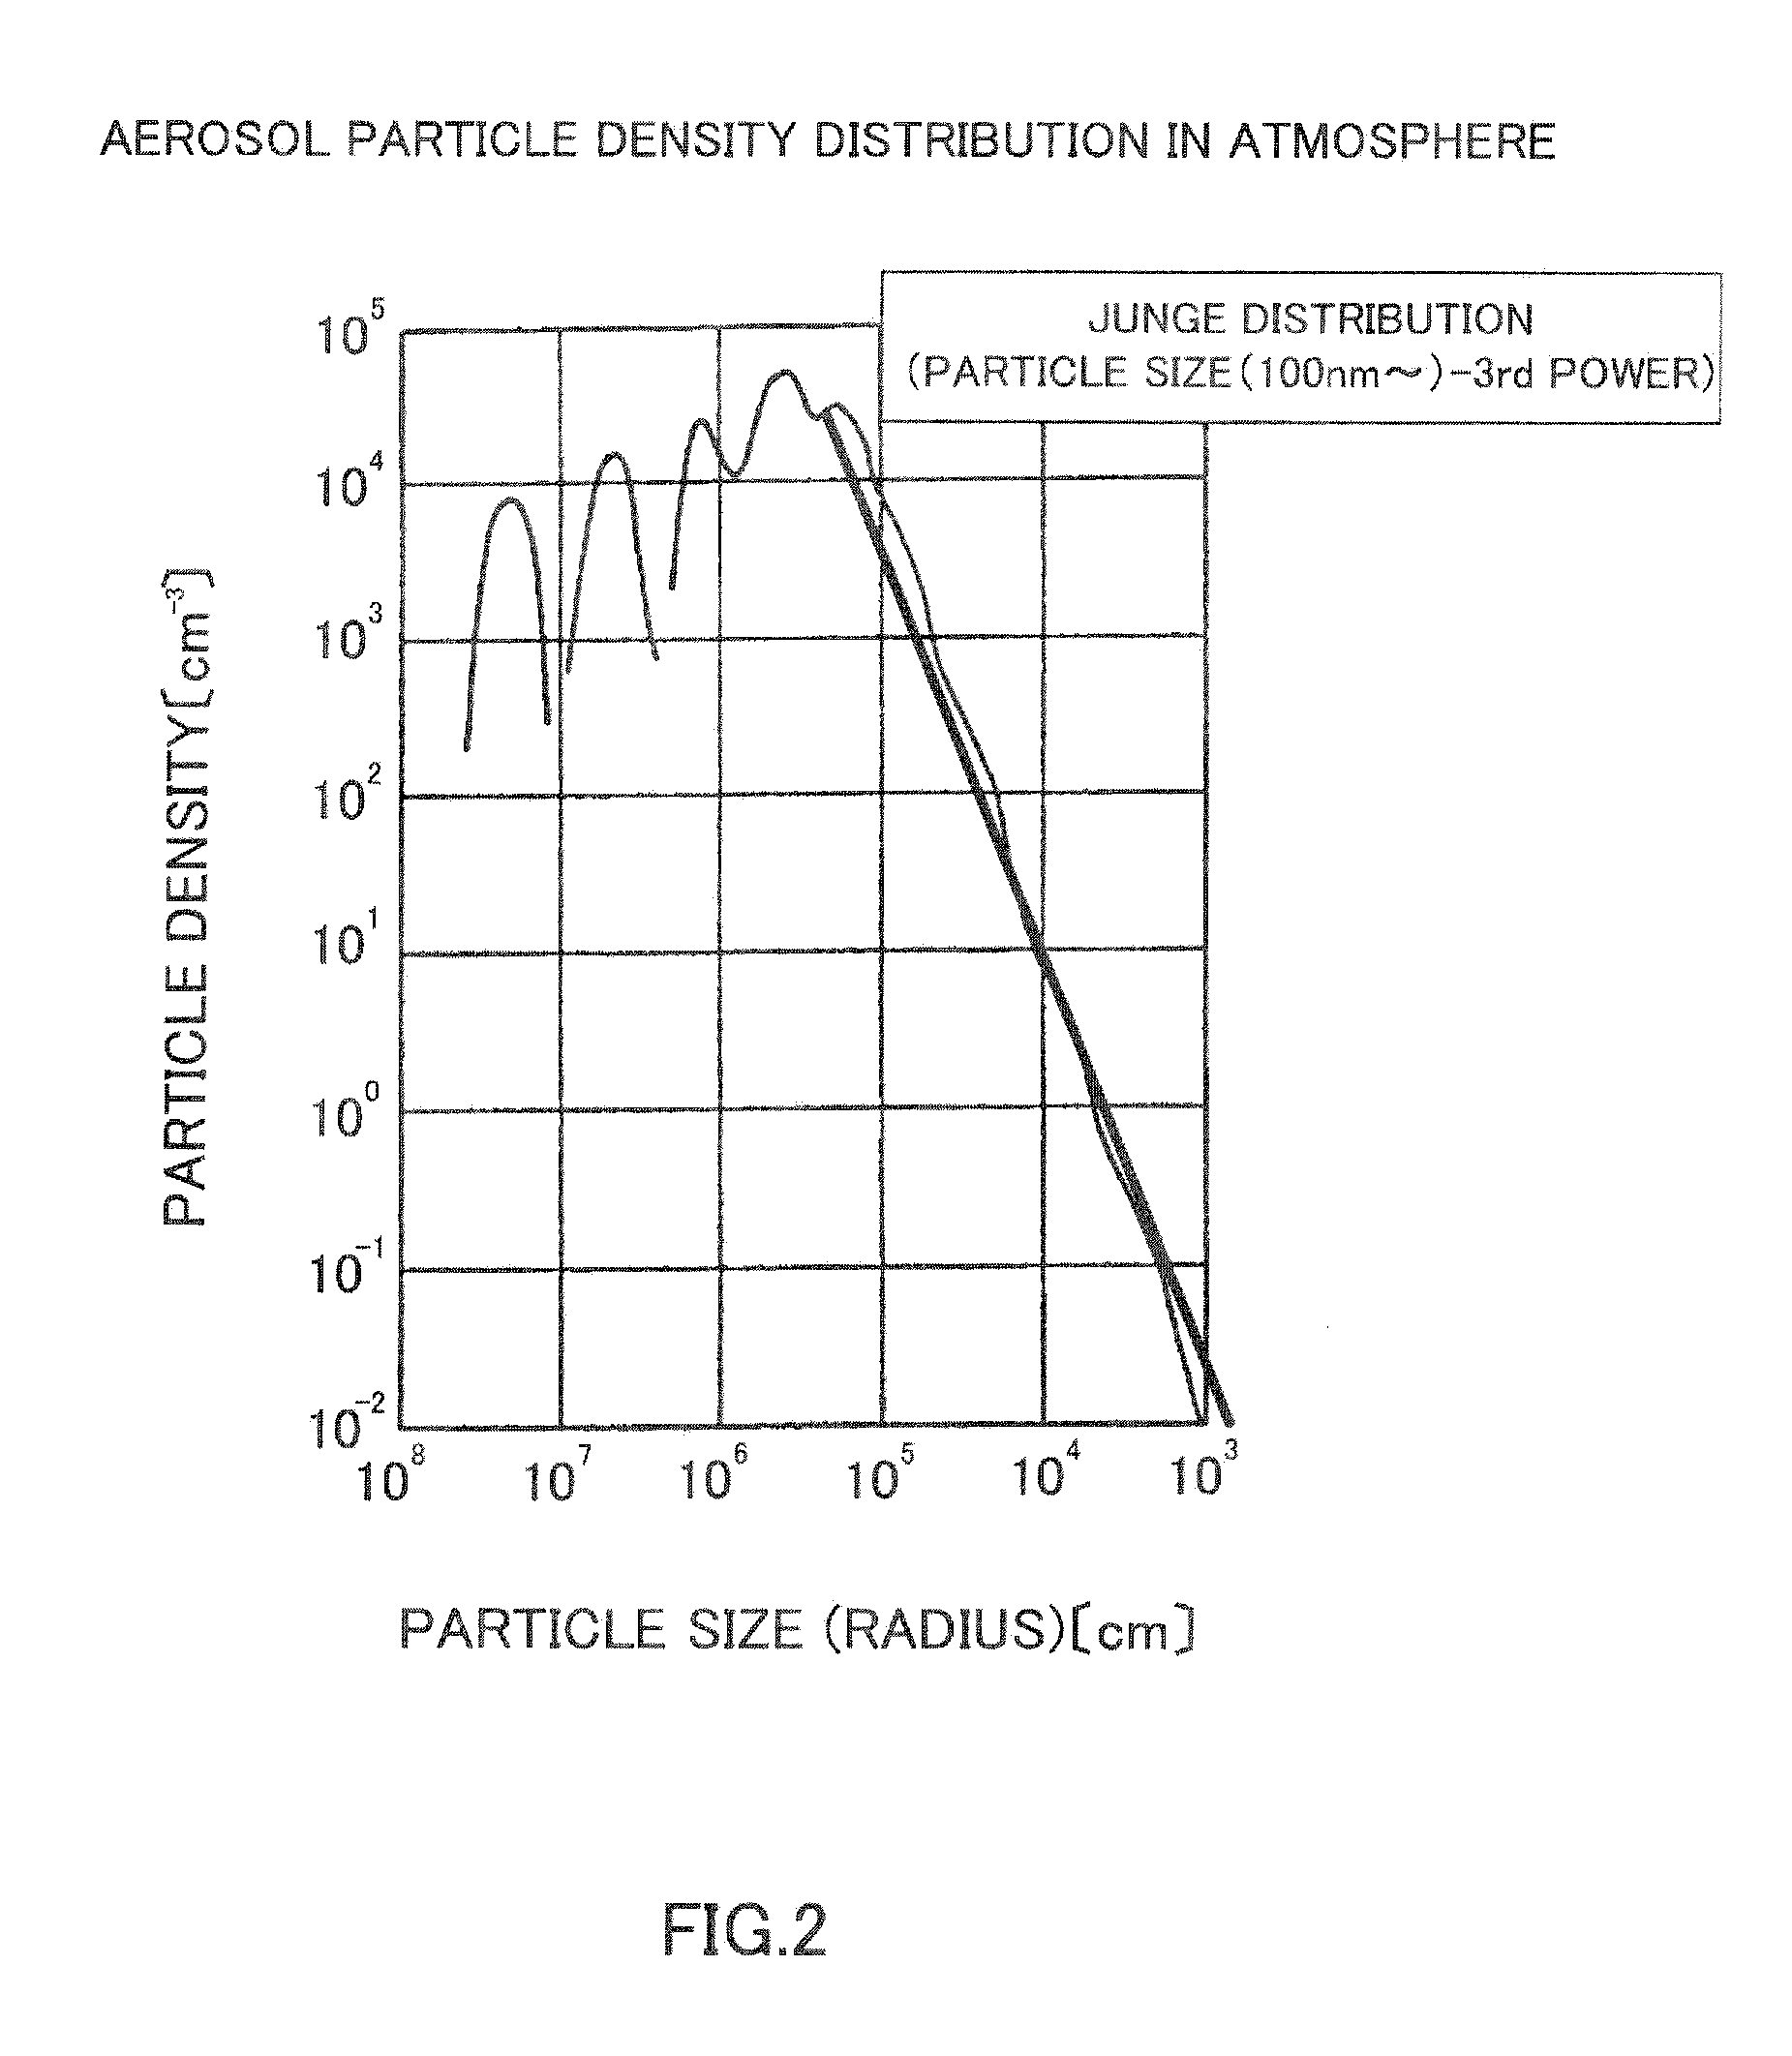 System and method for detecting aerosol particles in atmosphere and counting aerosol particles with respect to each particle size